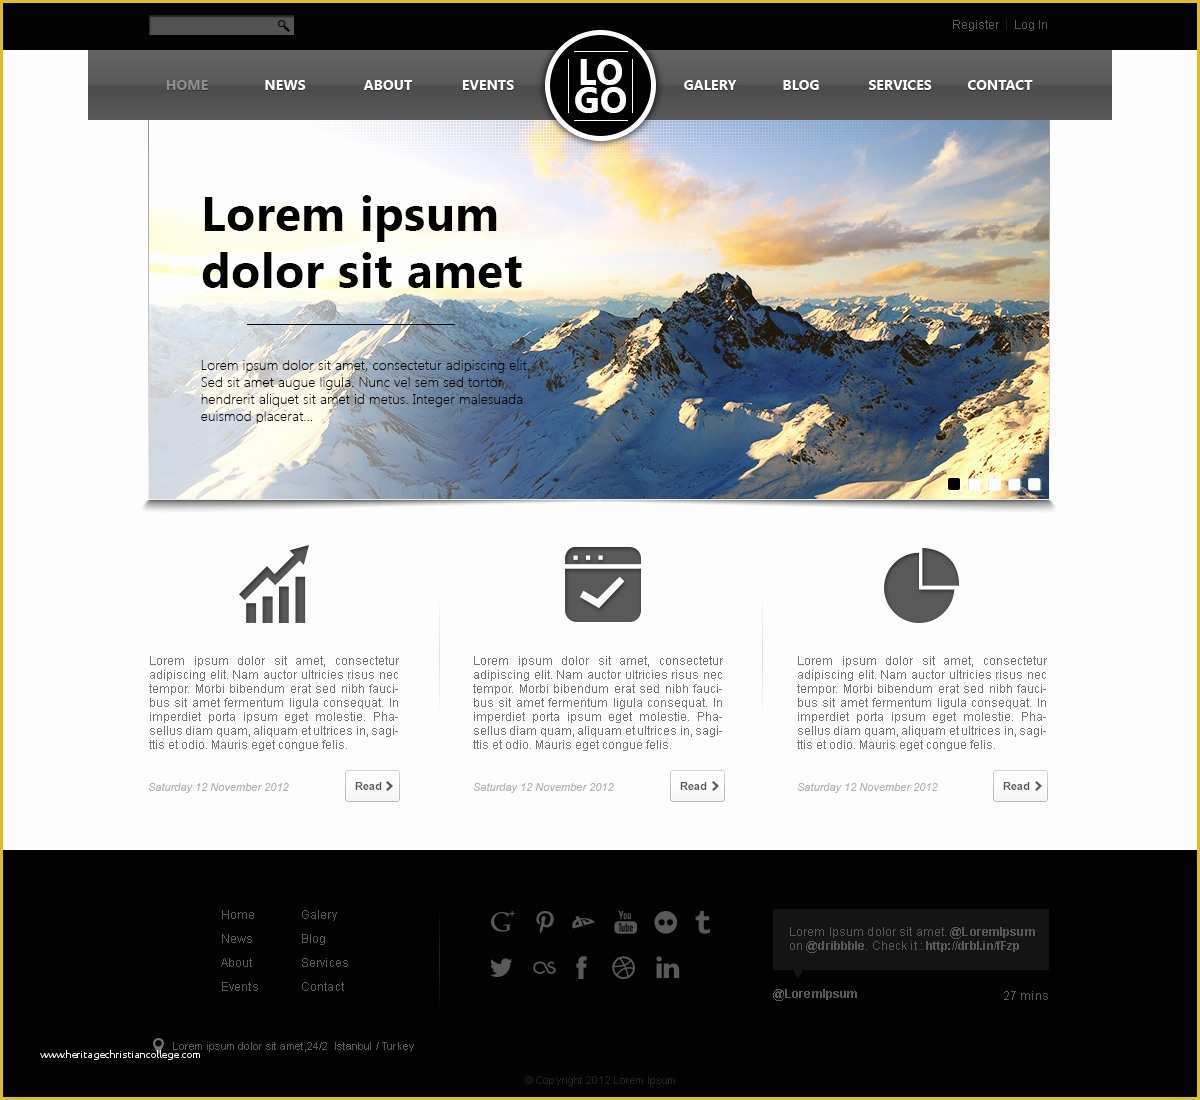 Free Design Templates Of Well Designed Psd Website Templates for Free Download